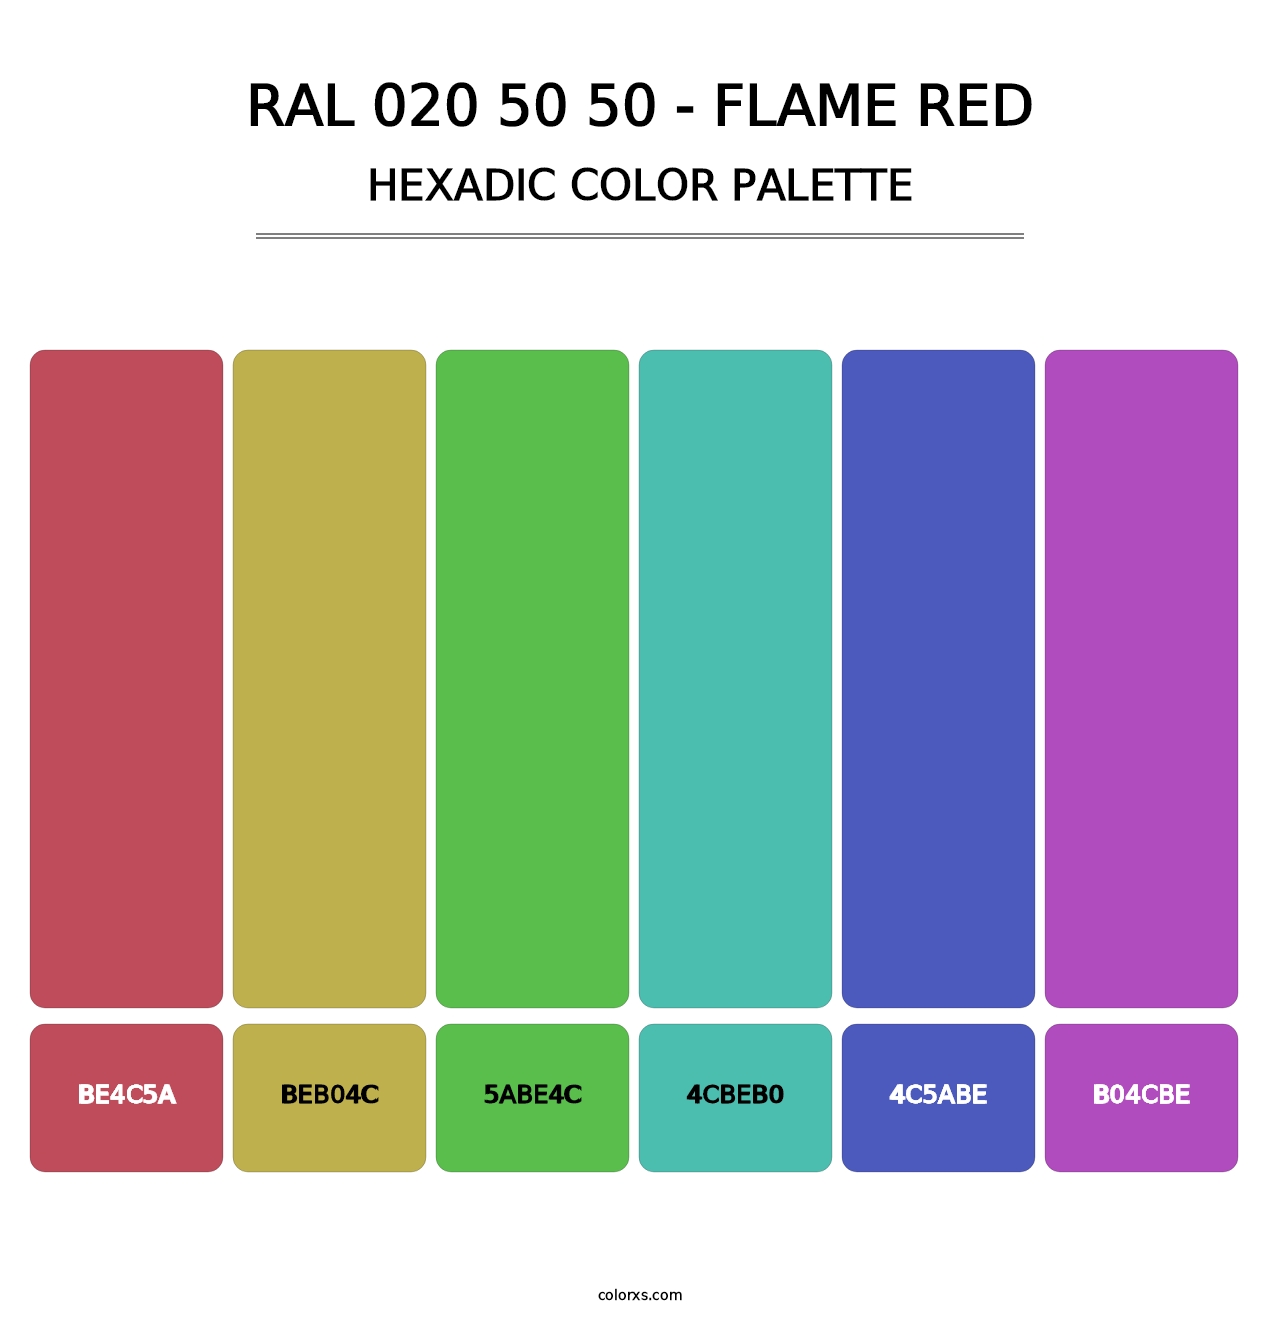 RAL 020 50 50 - Flame Red - Hexadic Color Palette